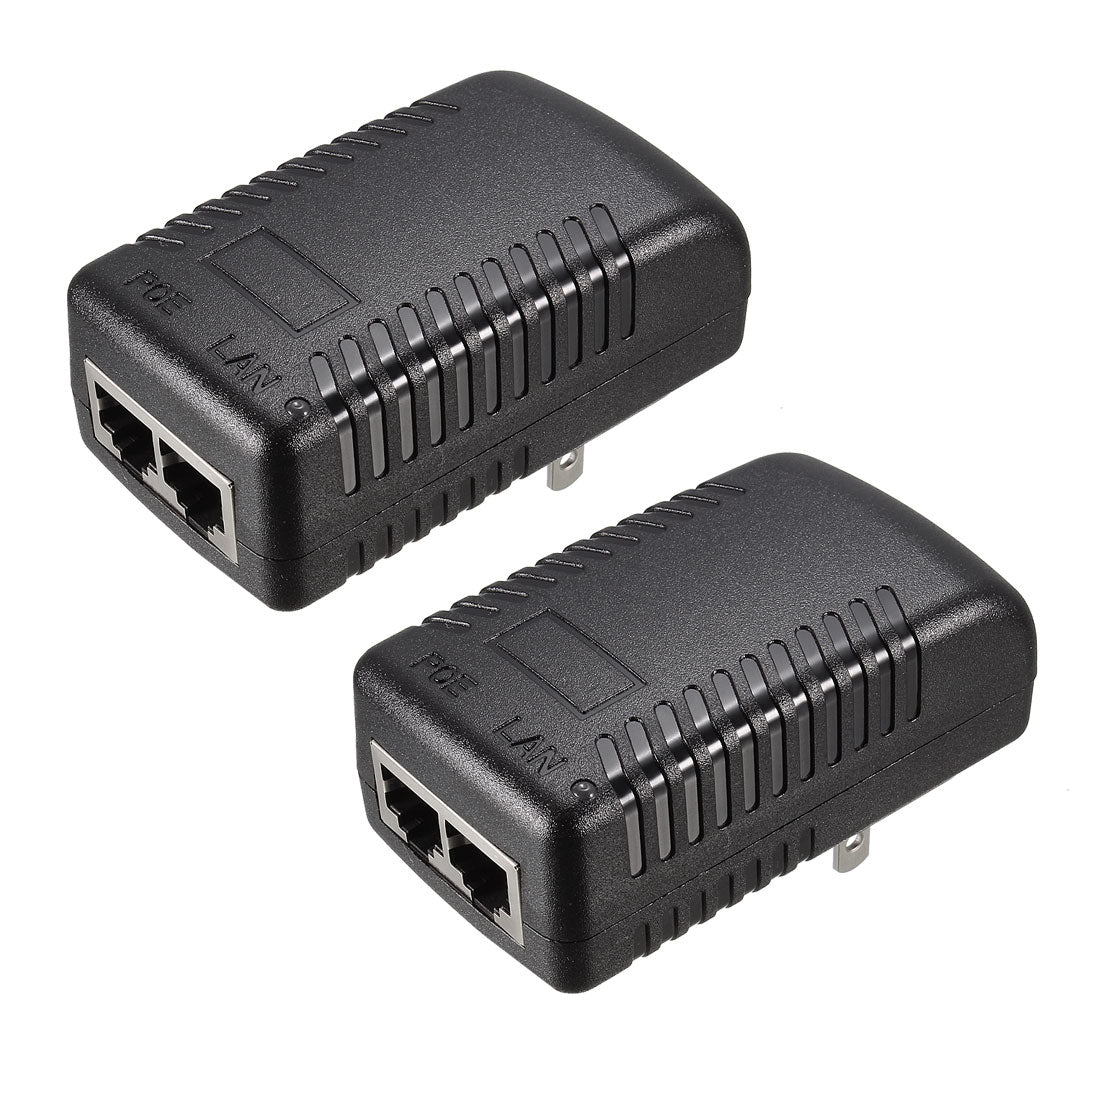 uxcell Uxcell 2pcs 15V 1A POE Power Supply Injector Power over Ethernet Adapter Wall Plug (US Plug) for , Camera, Wireless IP Point